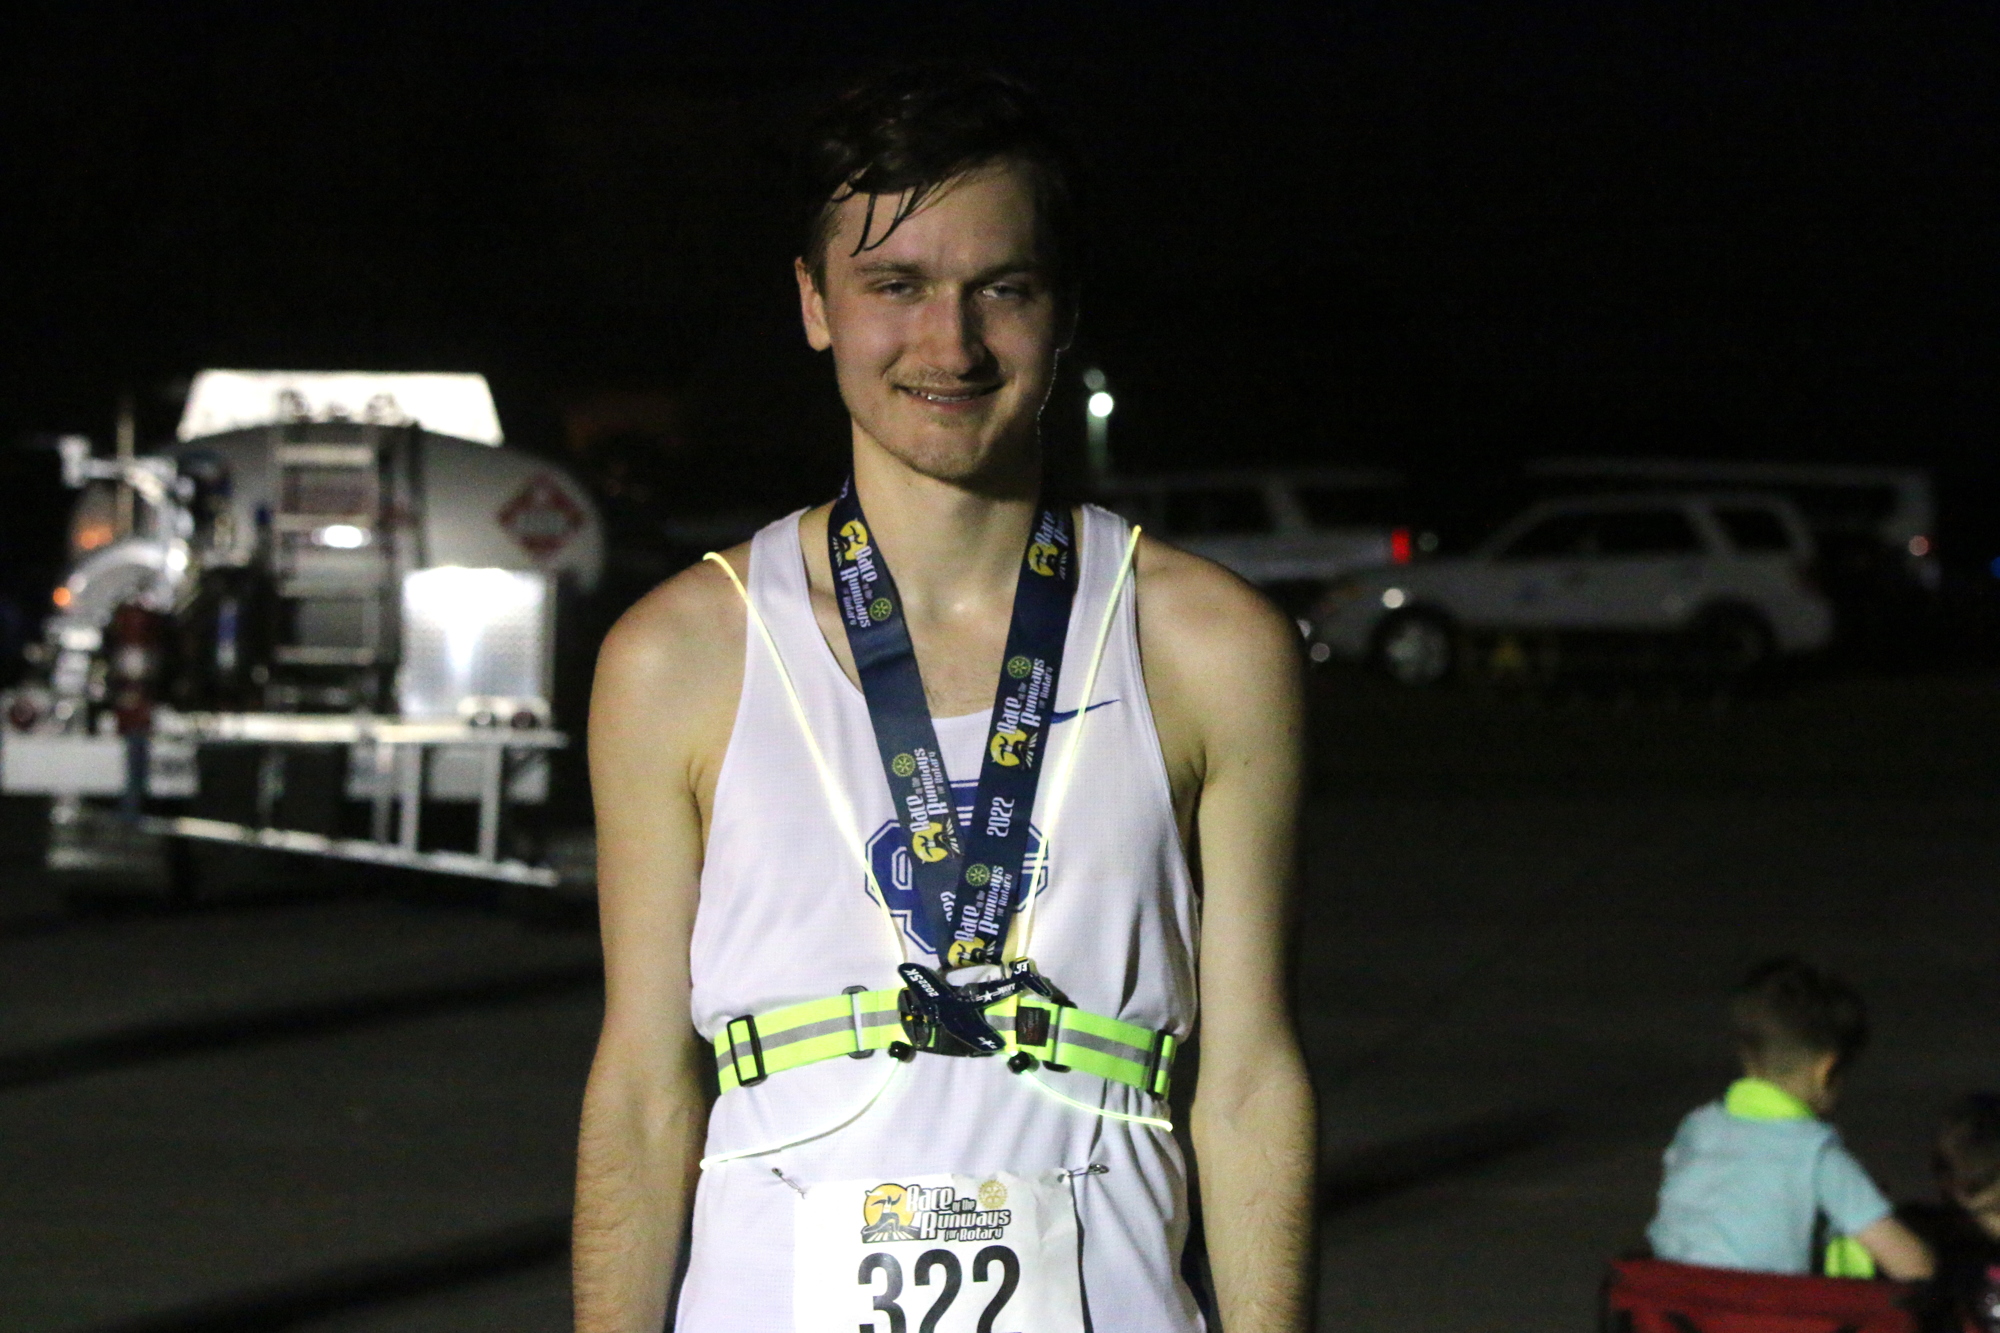 Male Open winner Michael Klein of Palm Coast had never run a night race before. Photo by Brent Woronoff